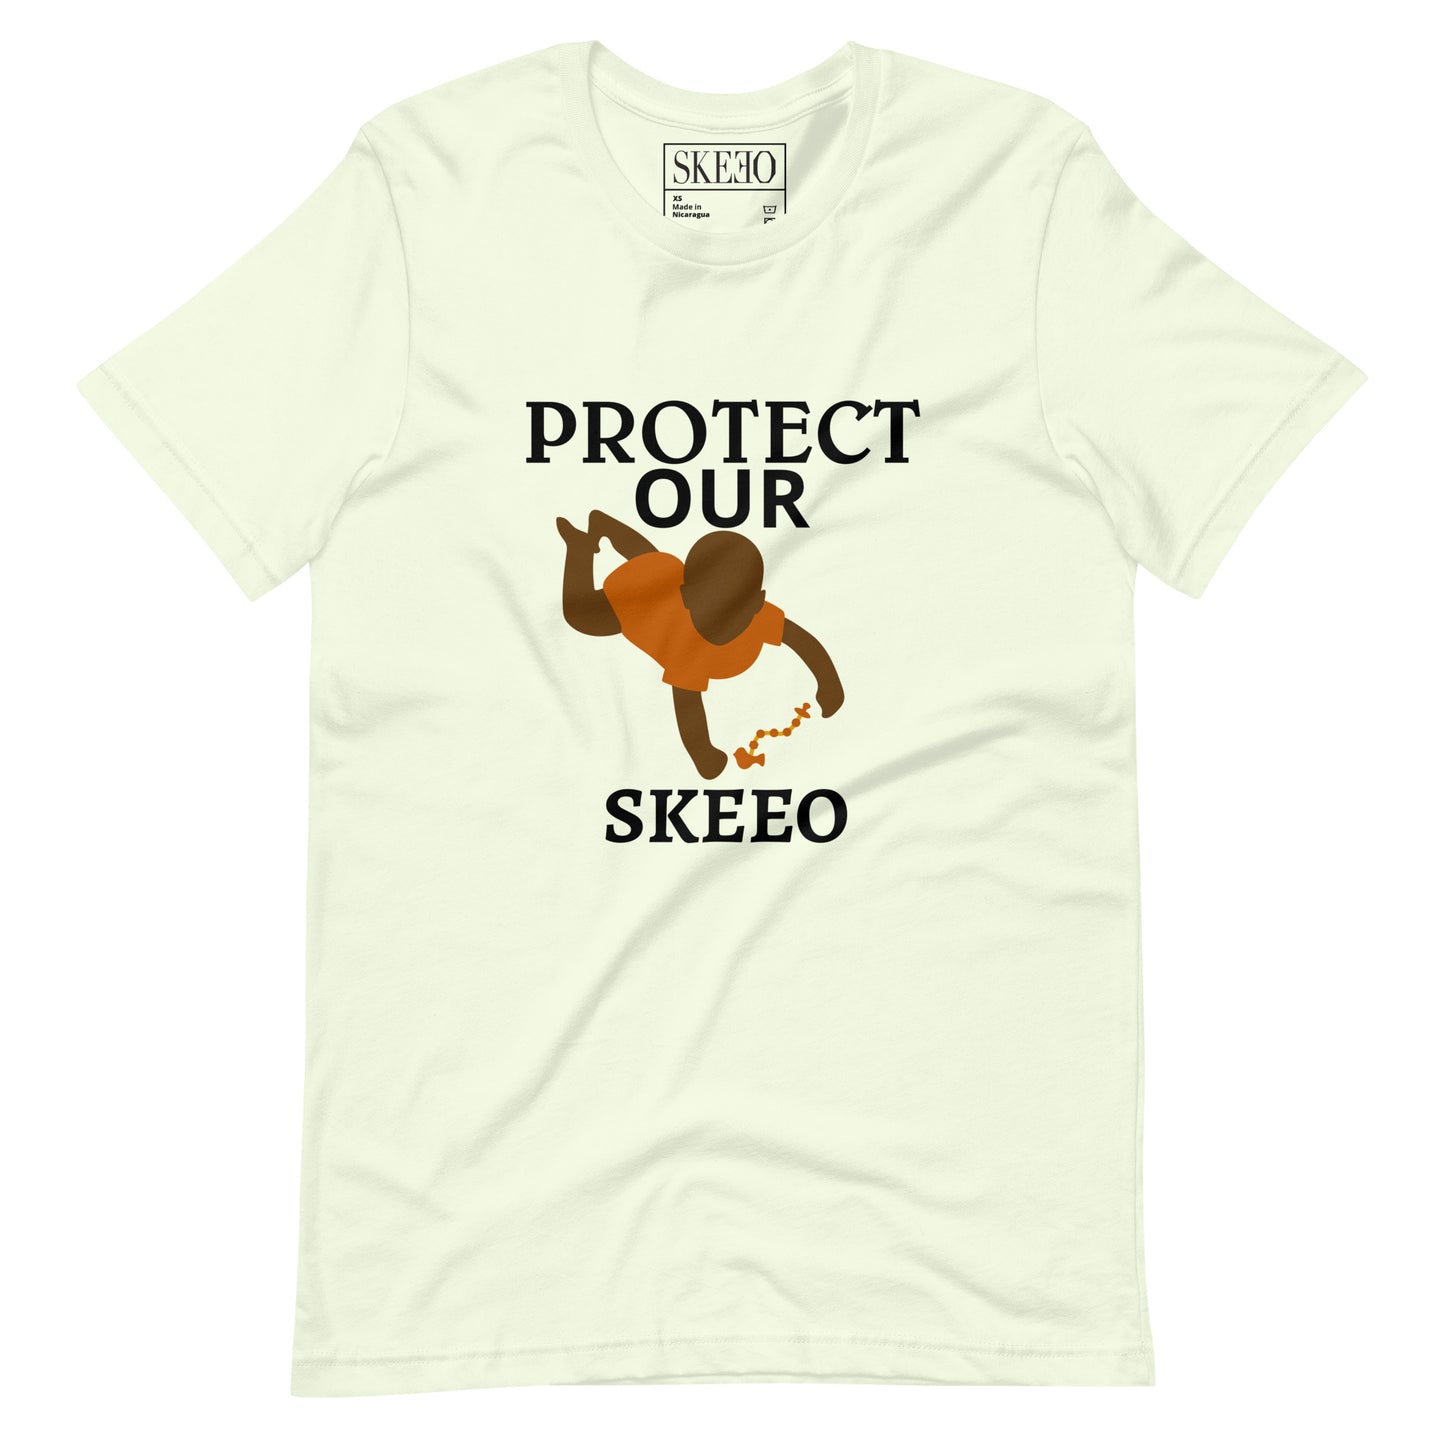 1 AAA Protect Our babies t-shirt